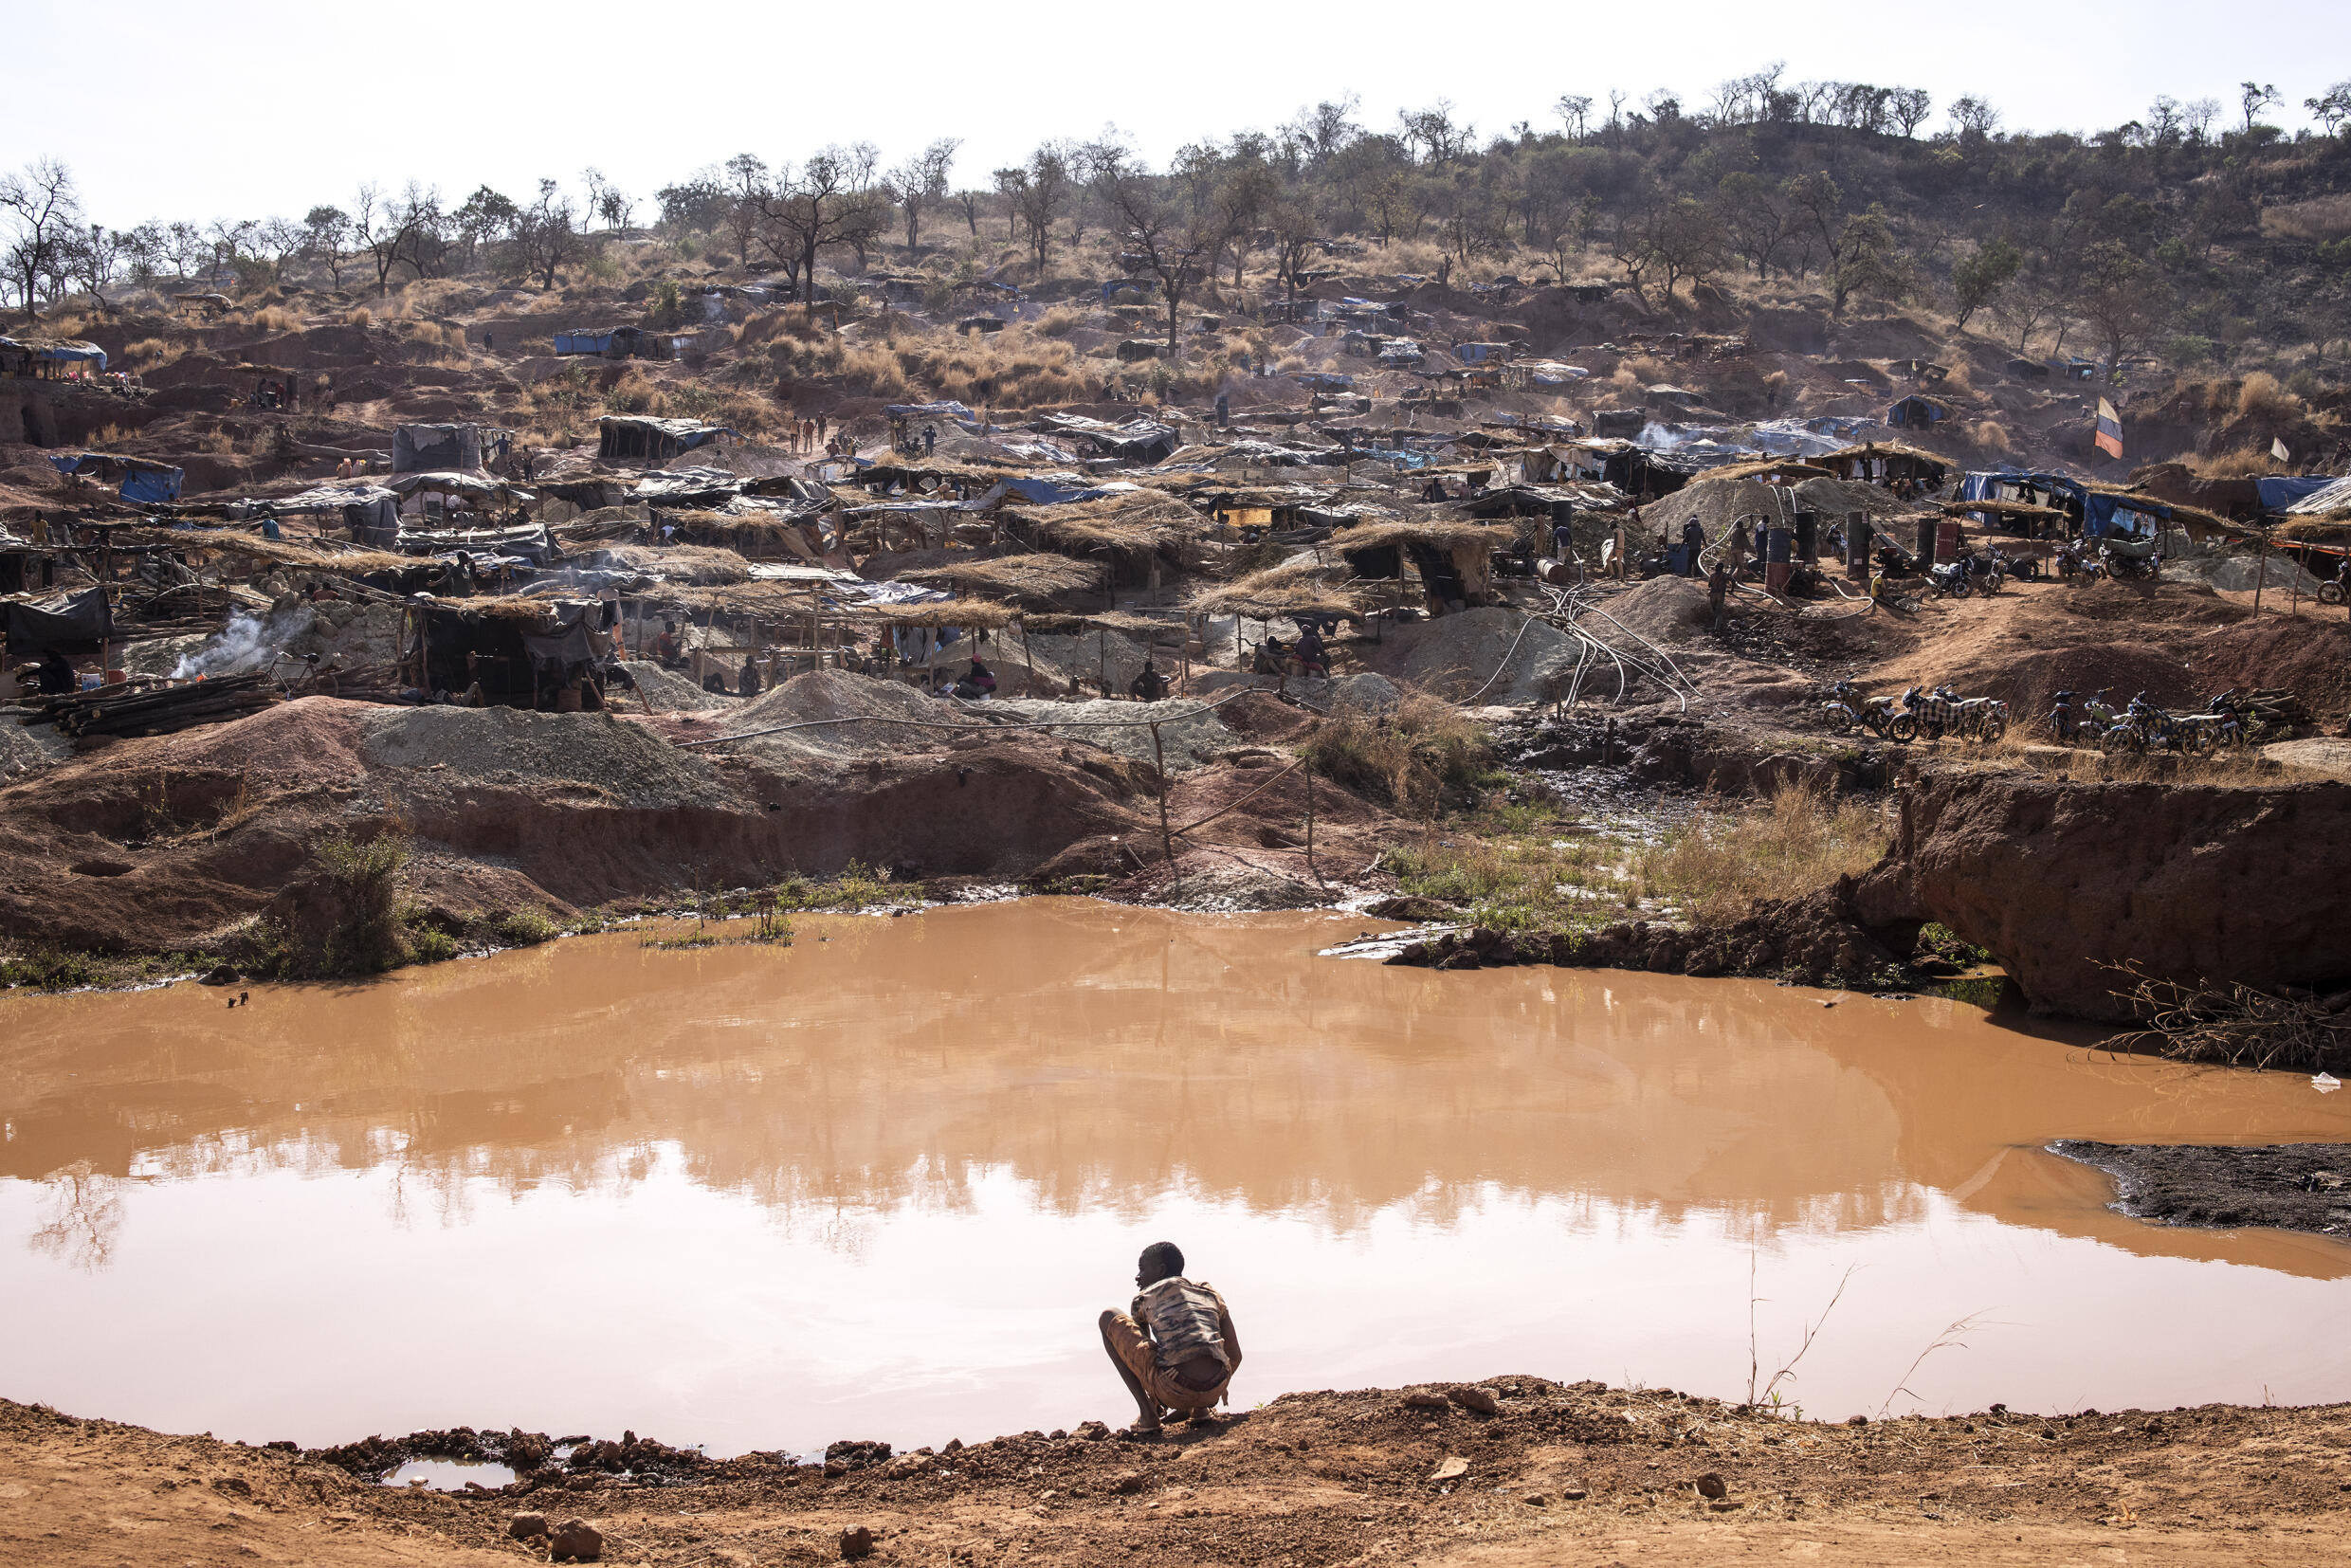 The mines attract migrant workers from about 20 different African countries. Photo: AFP